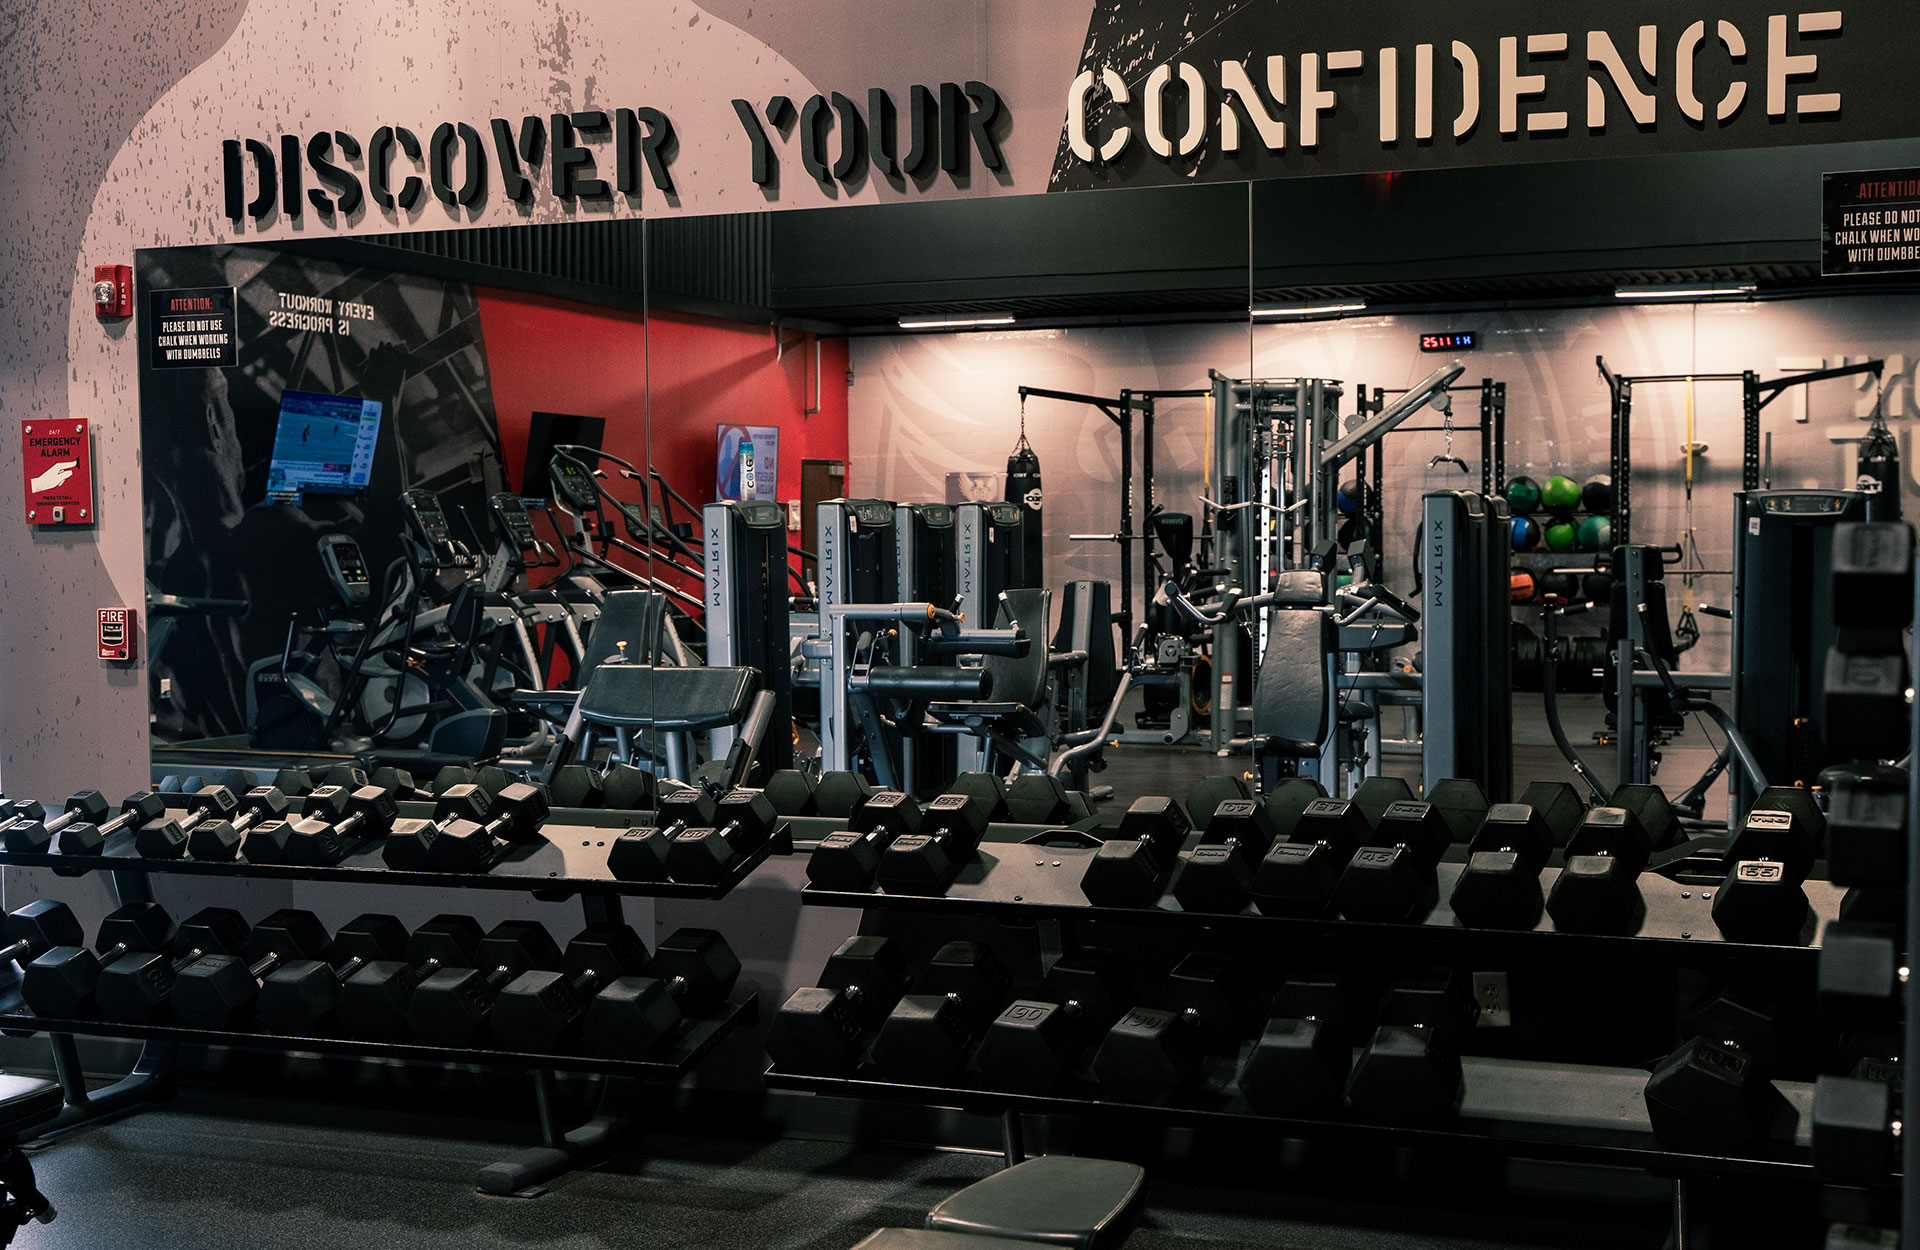 Dumbell rack and mirror at the 88 Tactical 24/7 fitness center